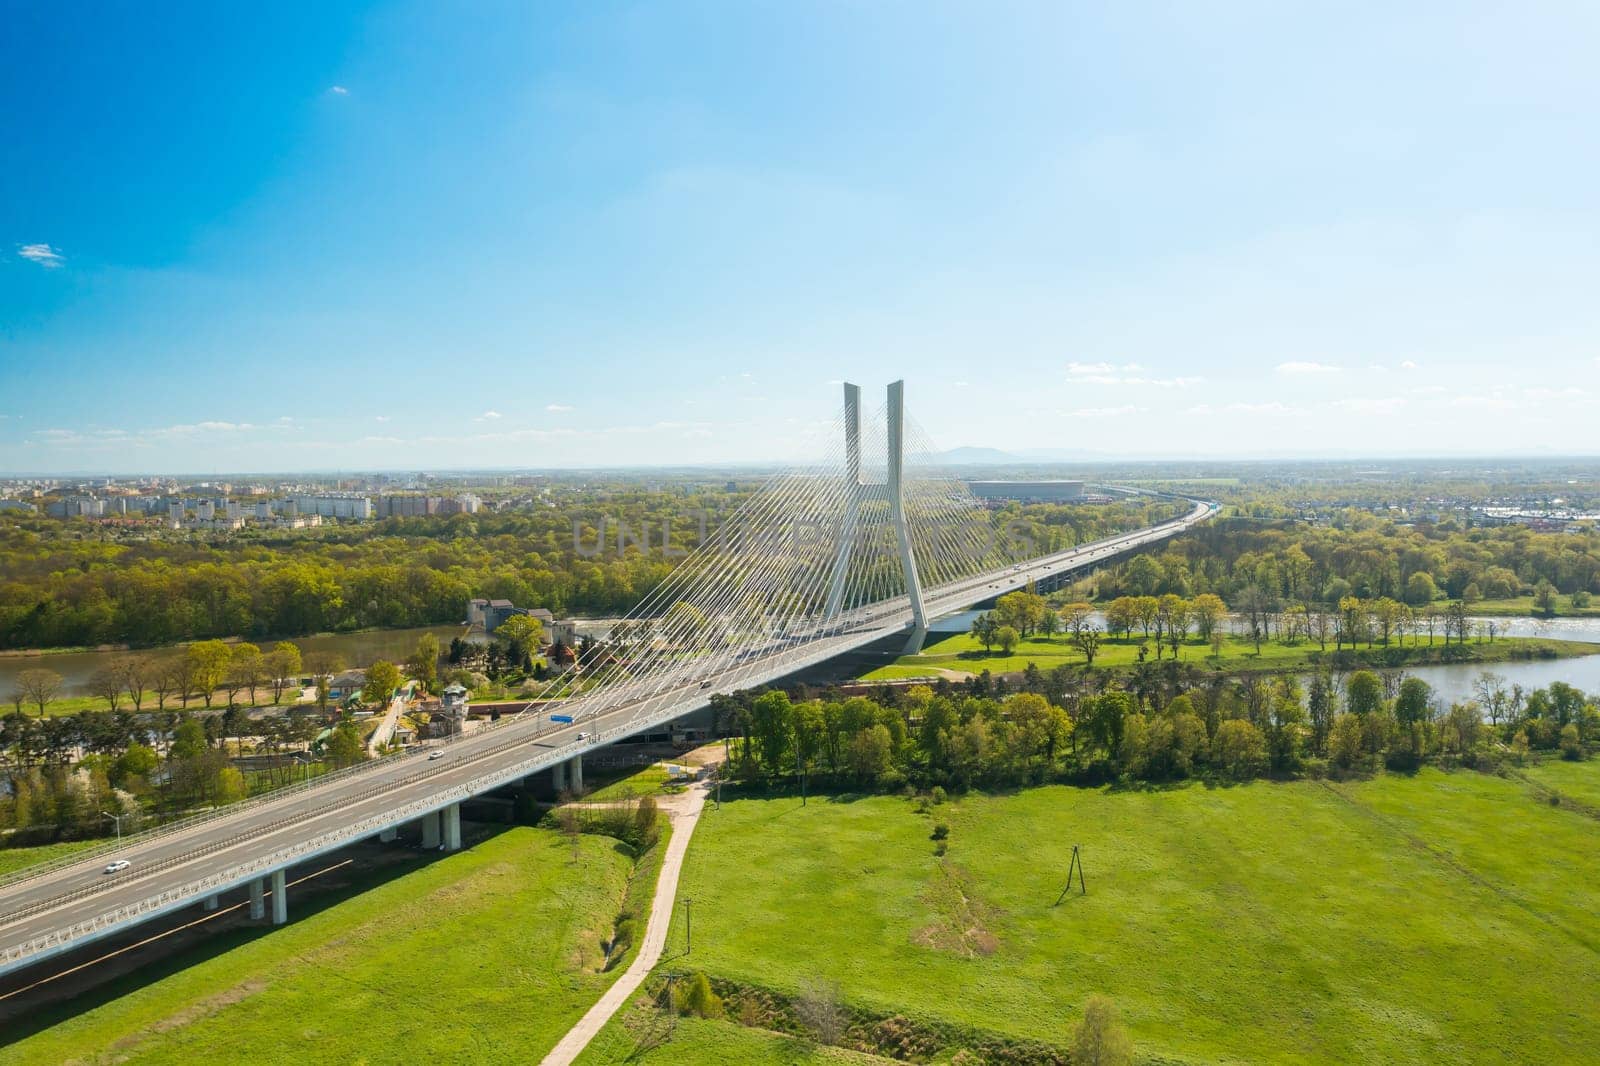 Famous cable-stayed Redzinski Bridge over blue flowing river among lush green forests. Scenic nature and urban infrastructure near Wroclaw aerial view